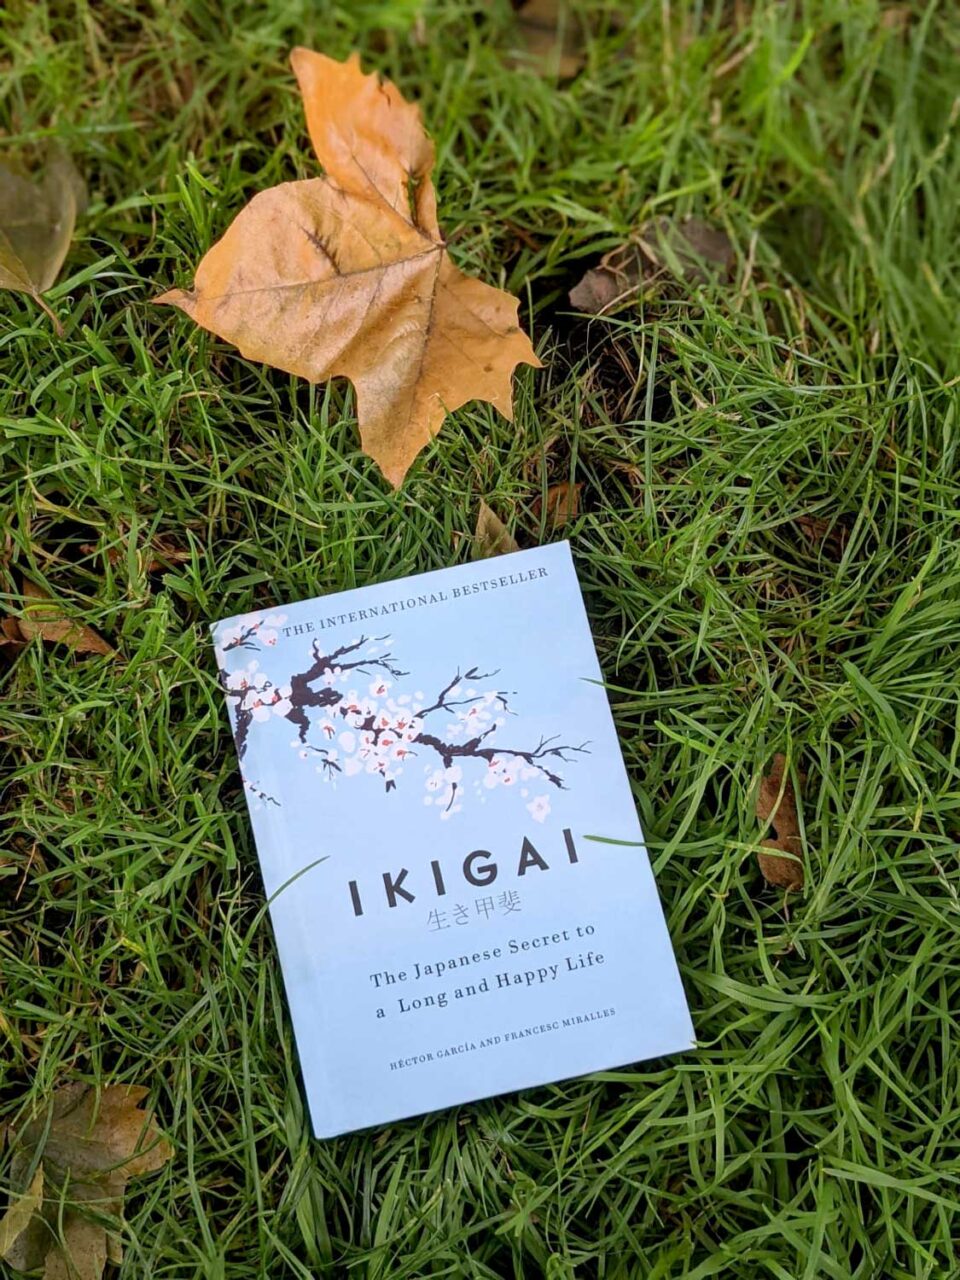 Ikigai-the japanese secret to a long and happy life